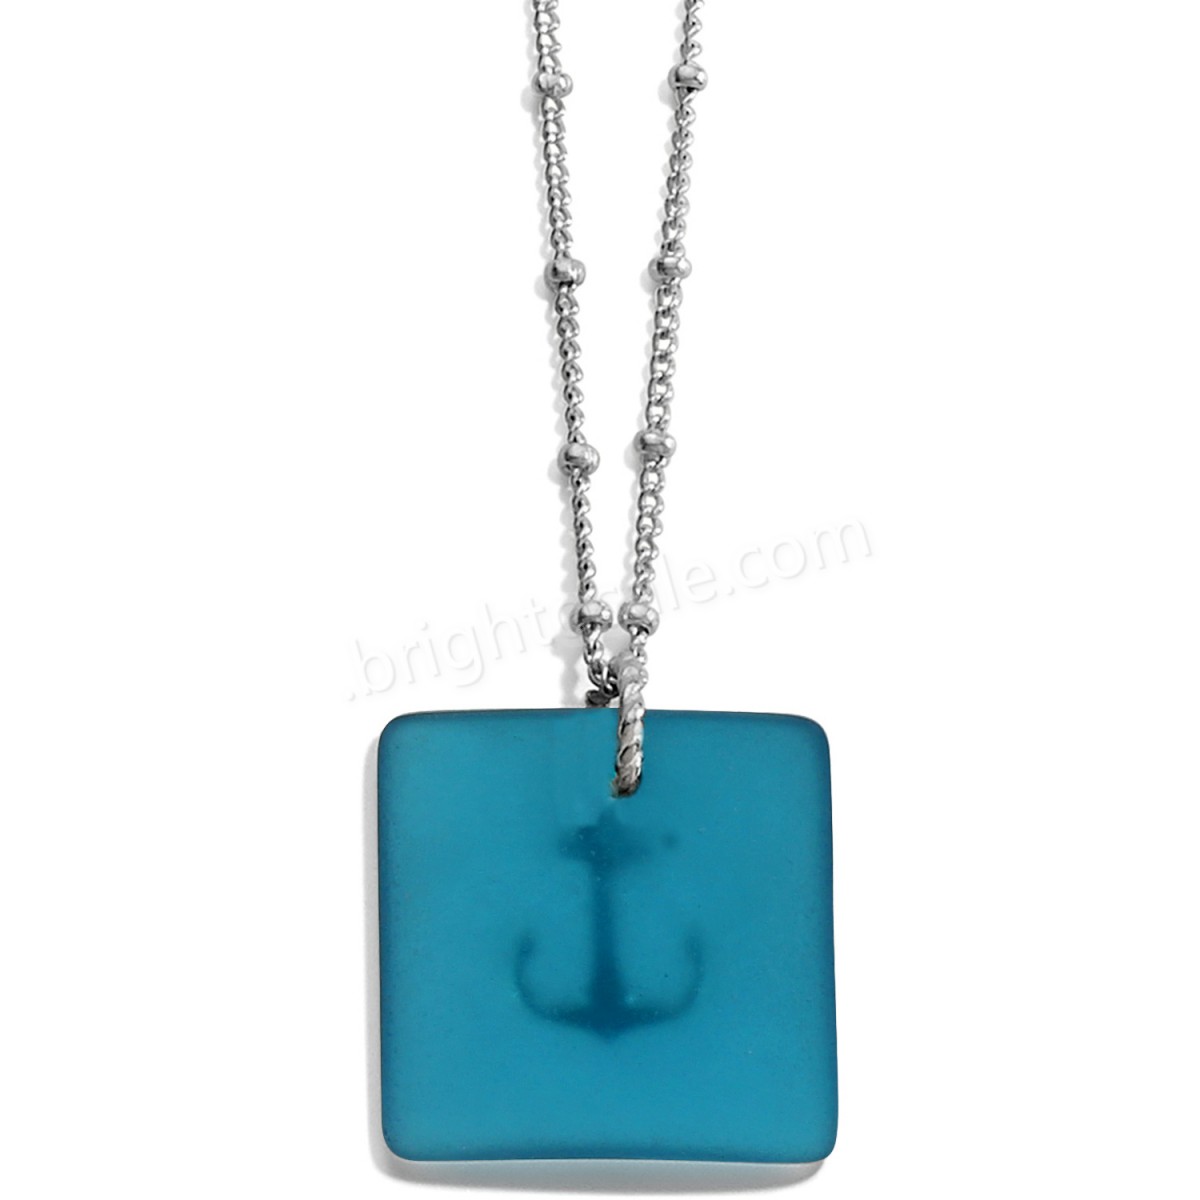 Brighton Collectibles & Online Discount Neptune's Rings Pyramid Drop Turquoise Necklace - -1